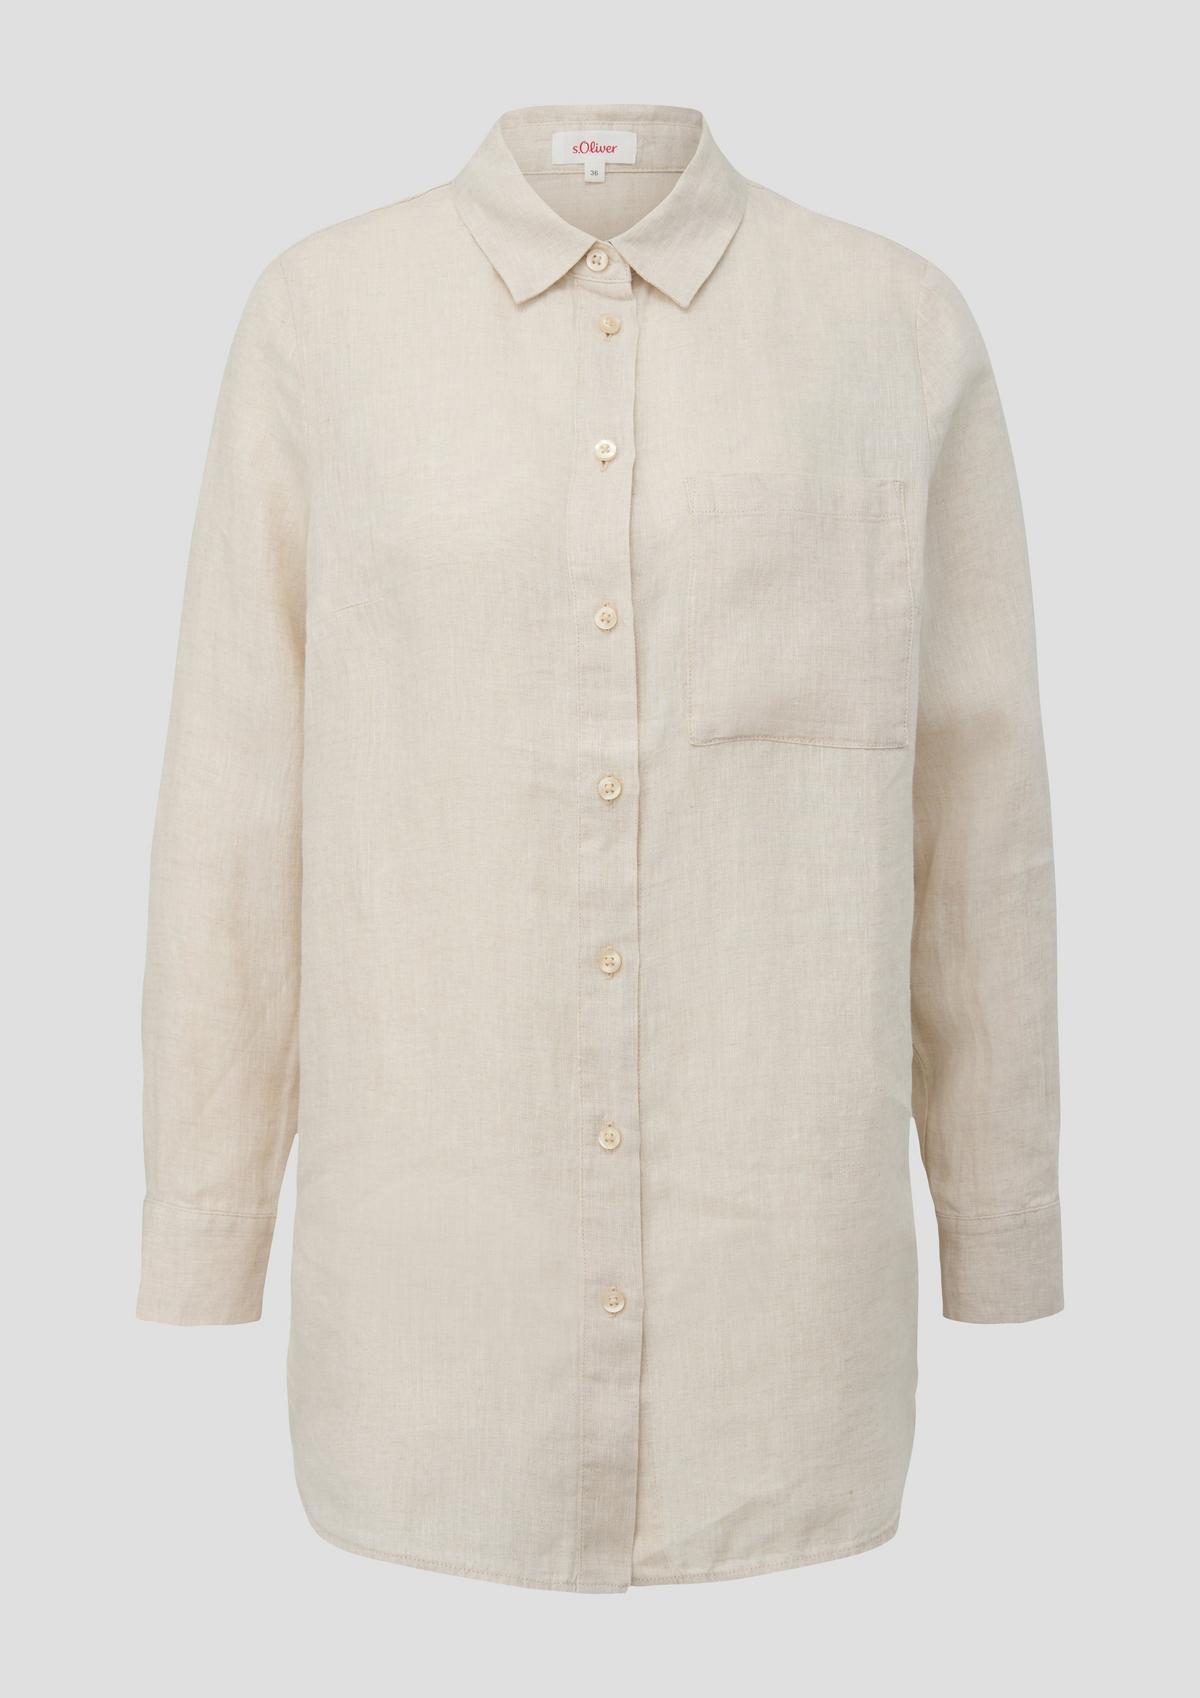 s.Oliver Long shirt blouse made of linen